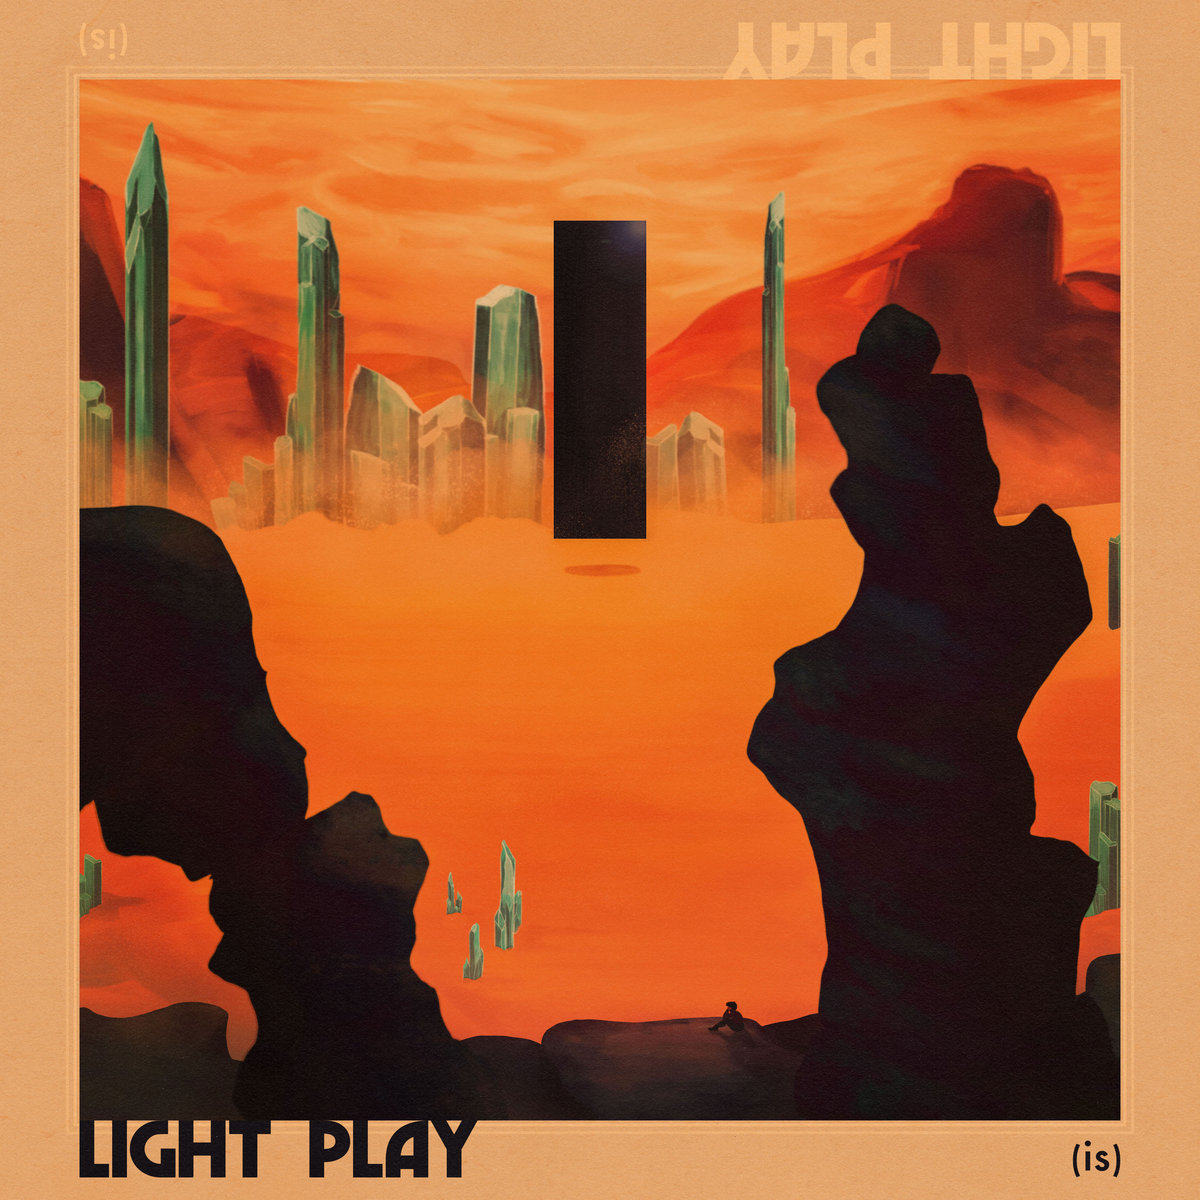 Light Play by (is) cover art - illustration of a strange futuristic world with orange mist and a black obelisk